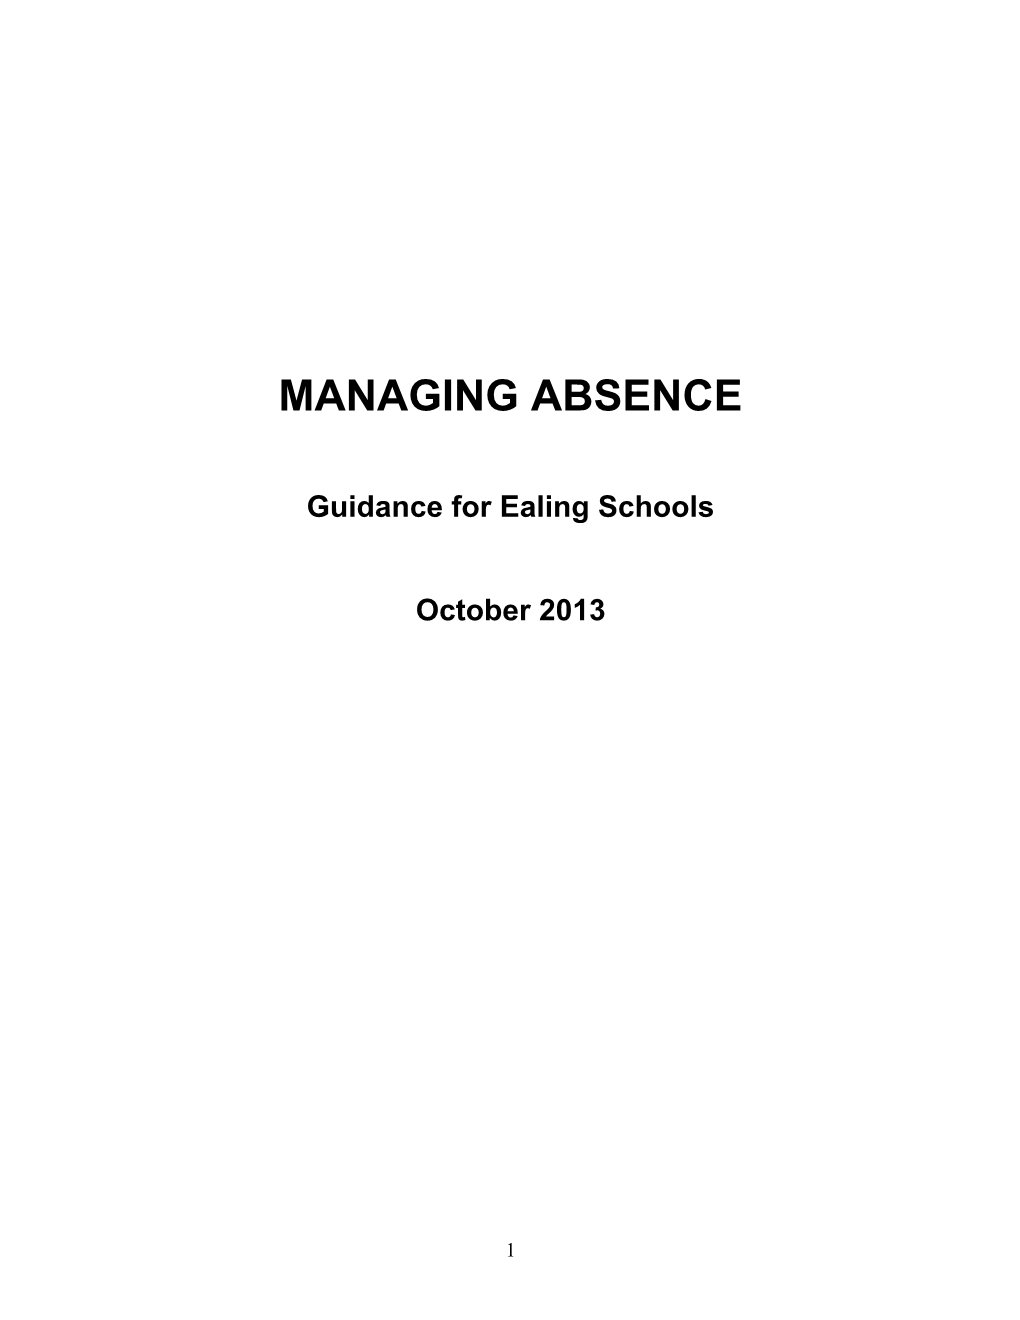 Guidance for Ealing Schools